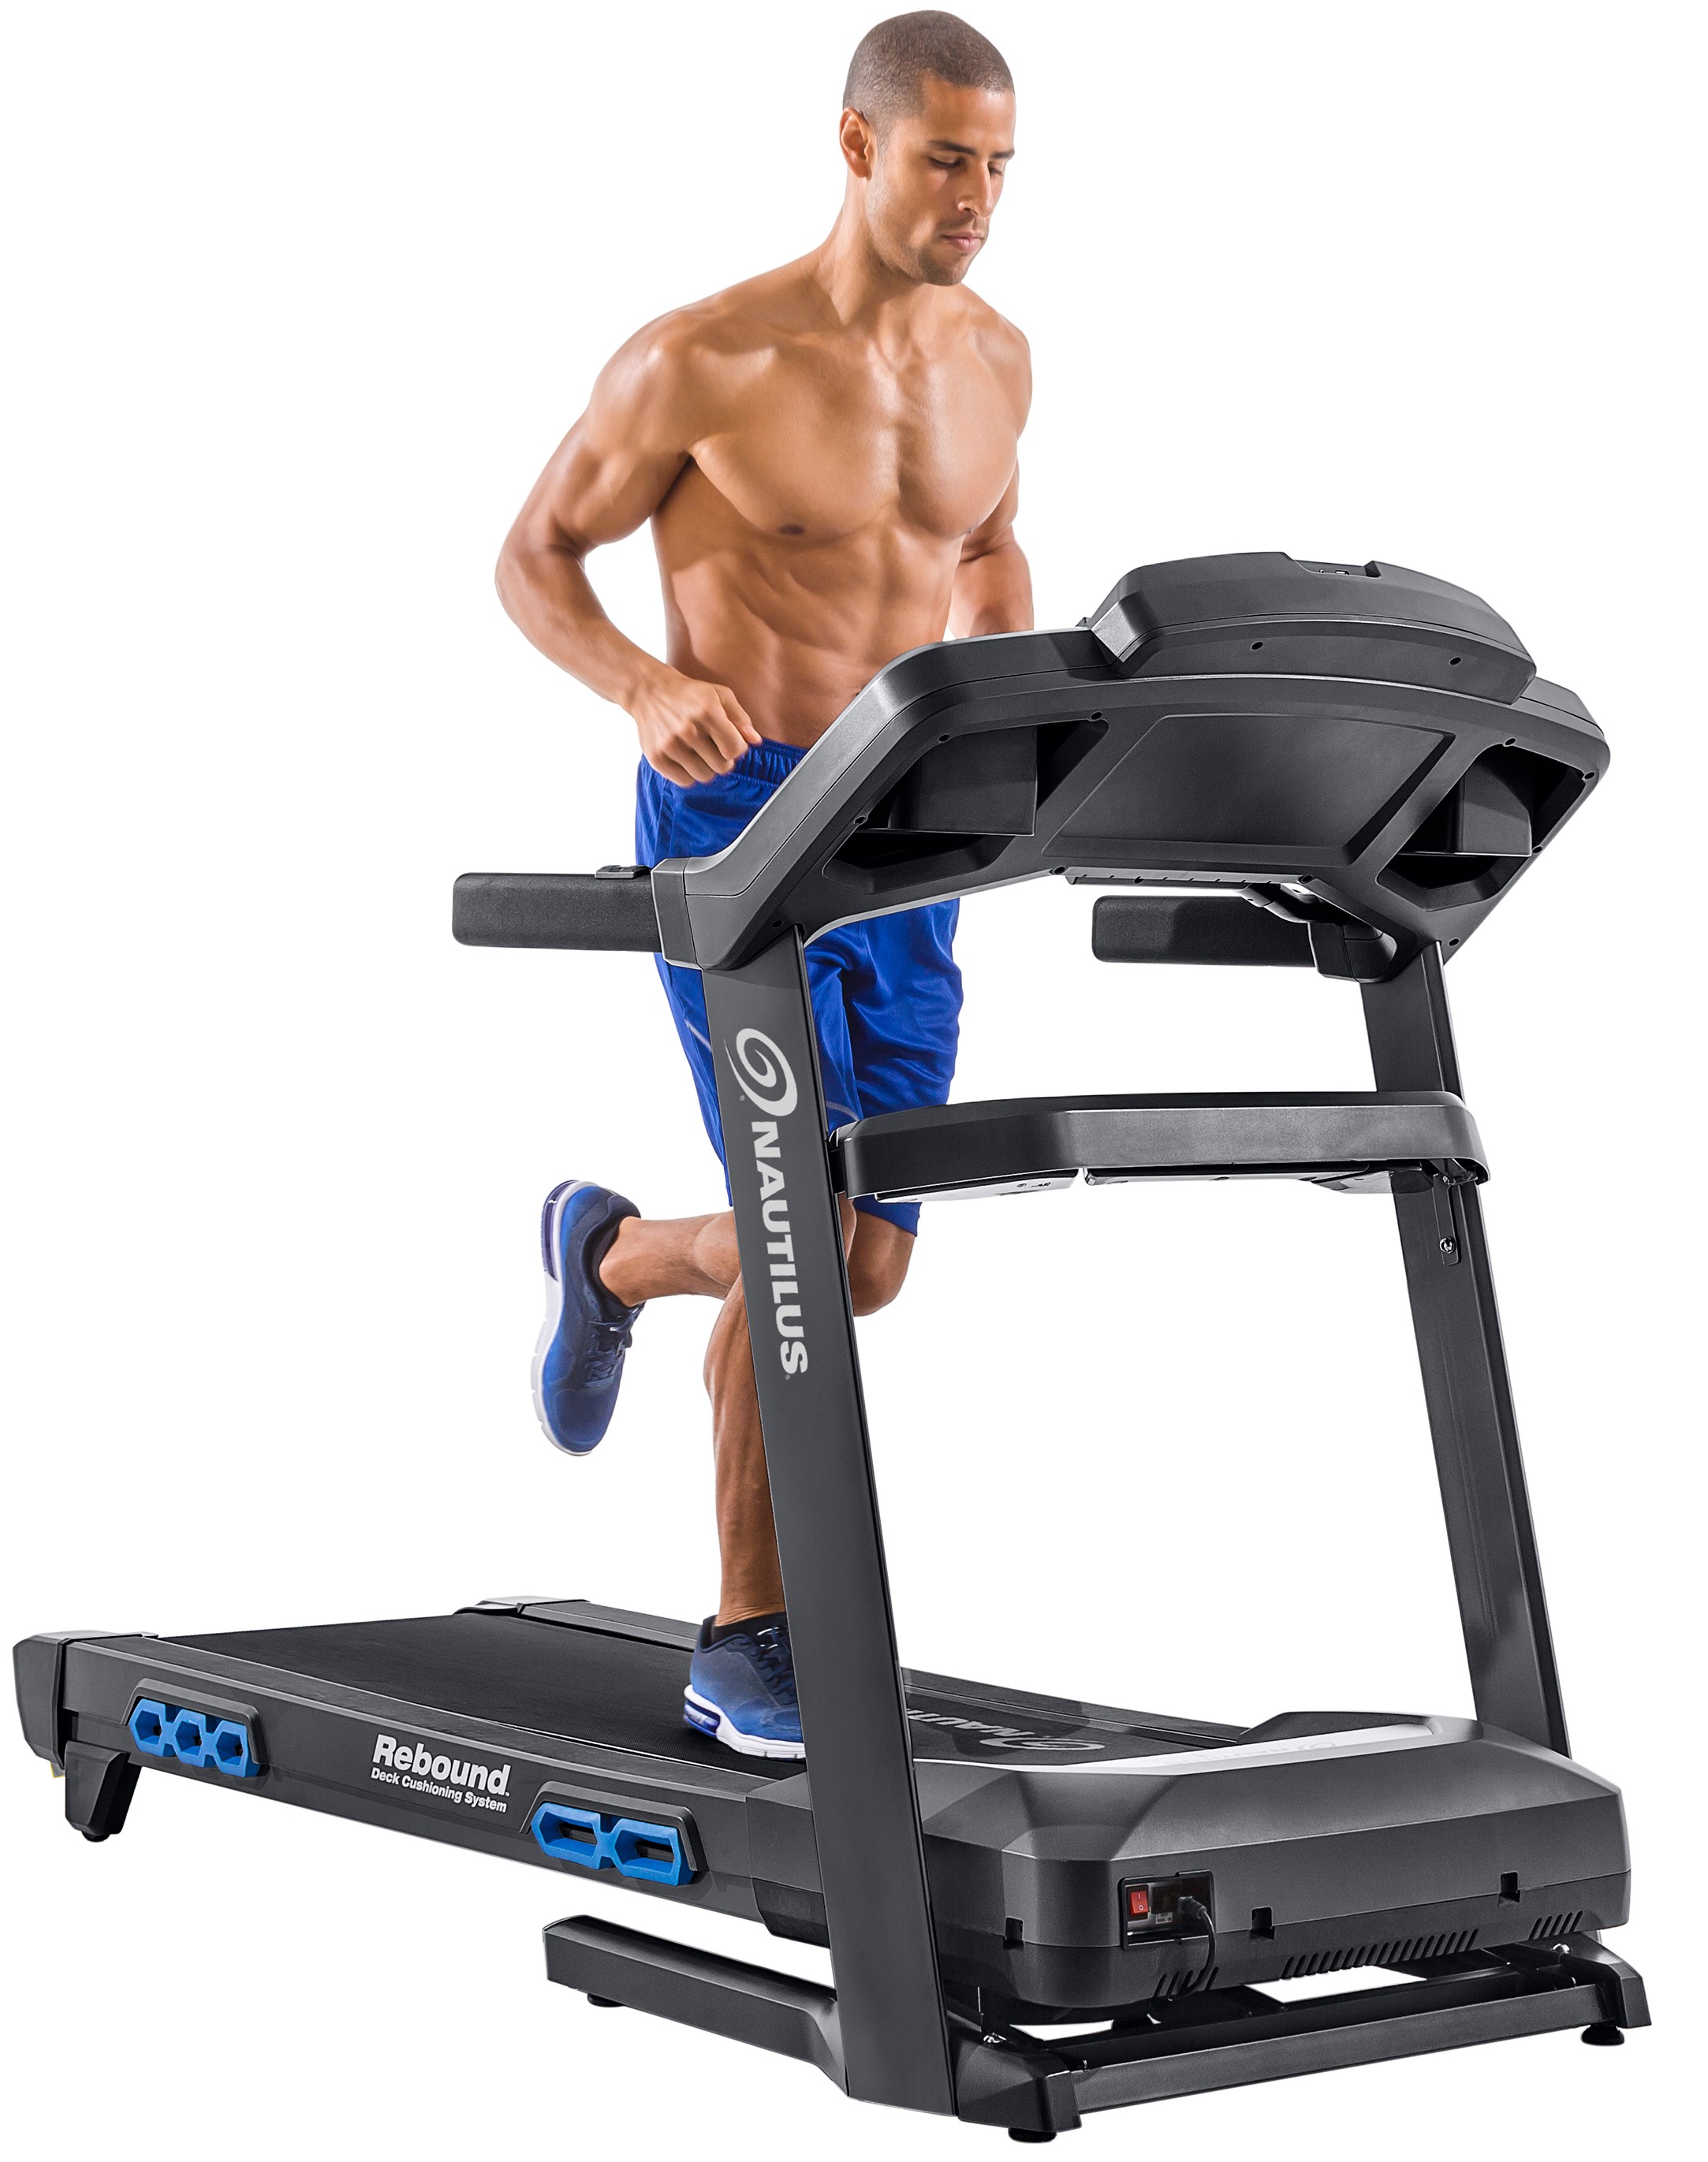 Nautilus T618 Performance Tracking Home Workout Training Treadmill Machine - image 1 of 10